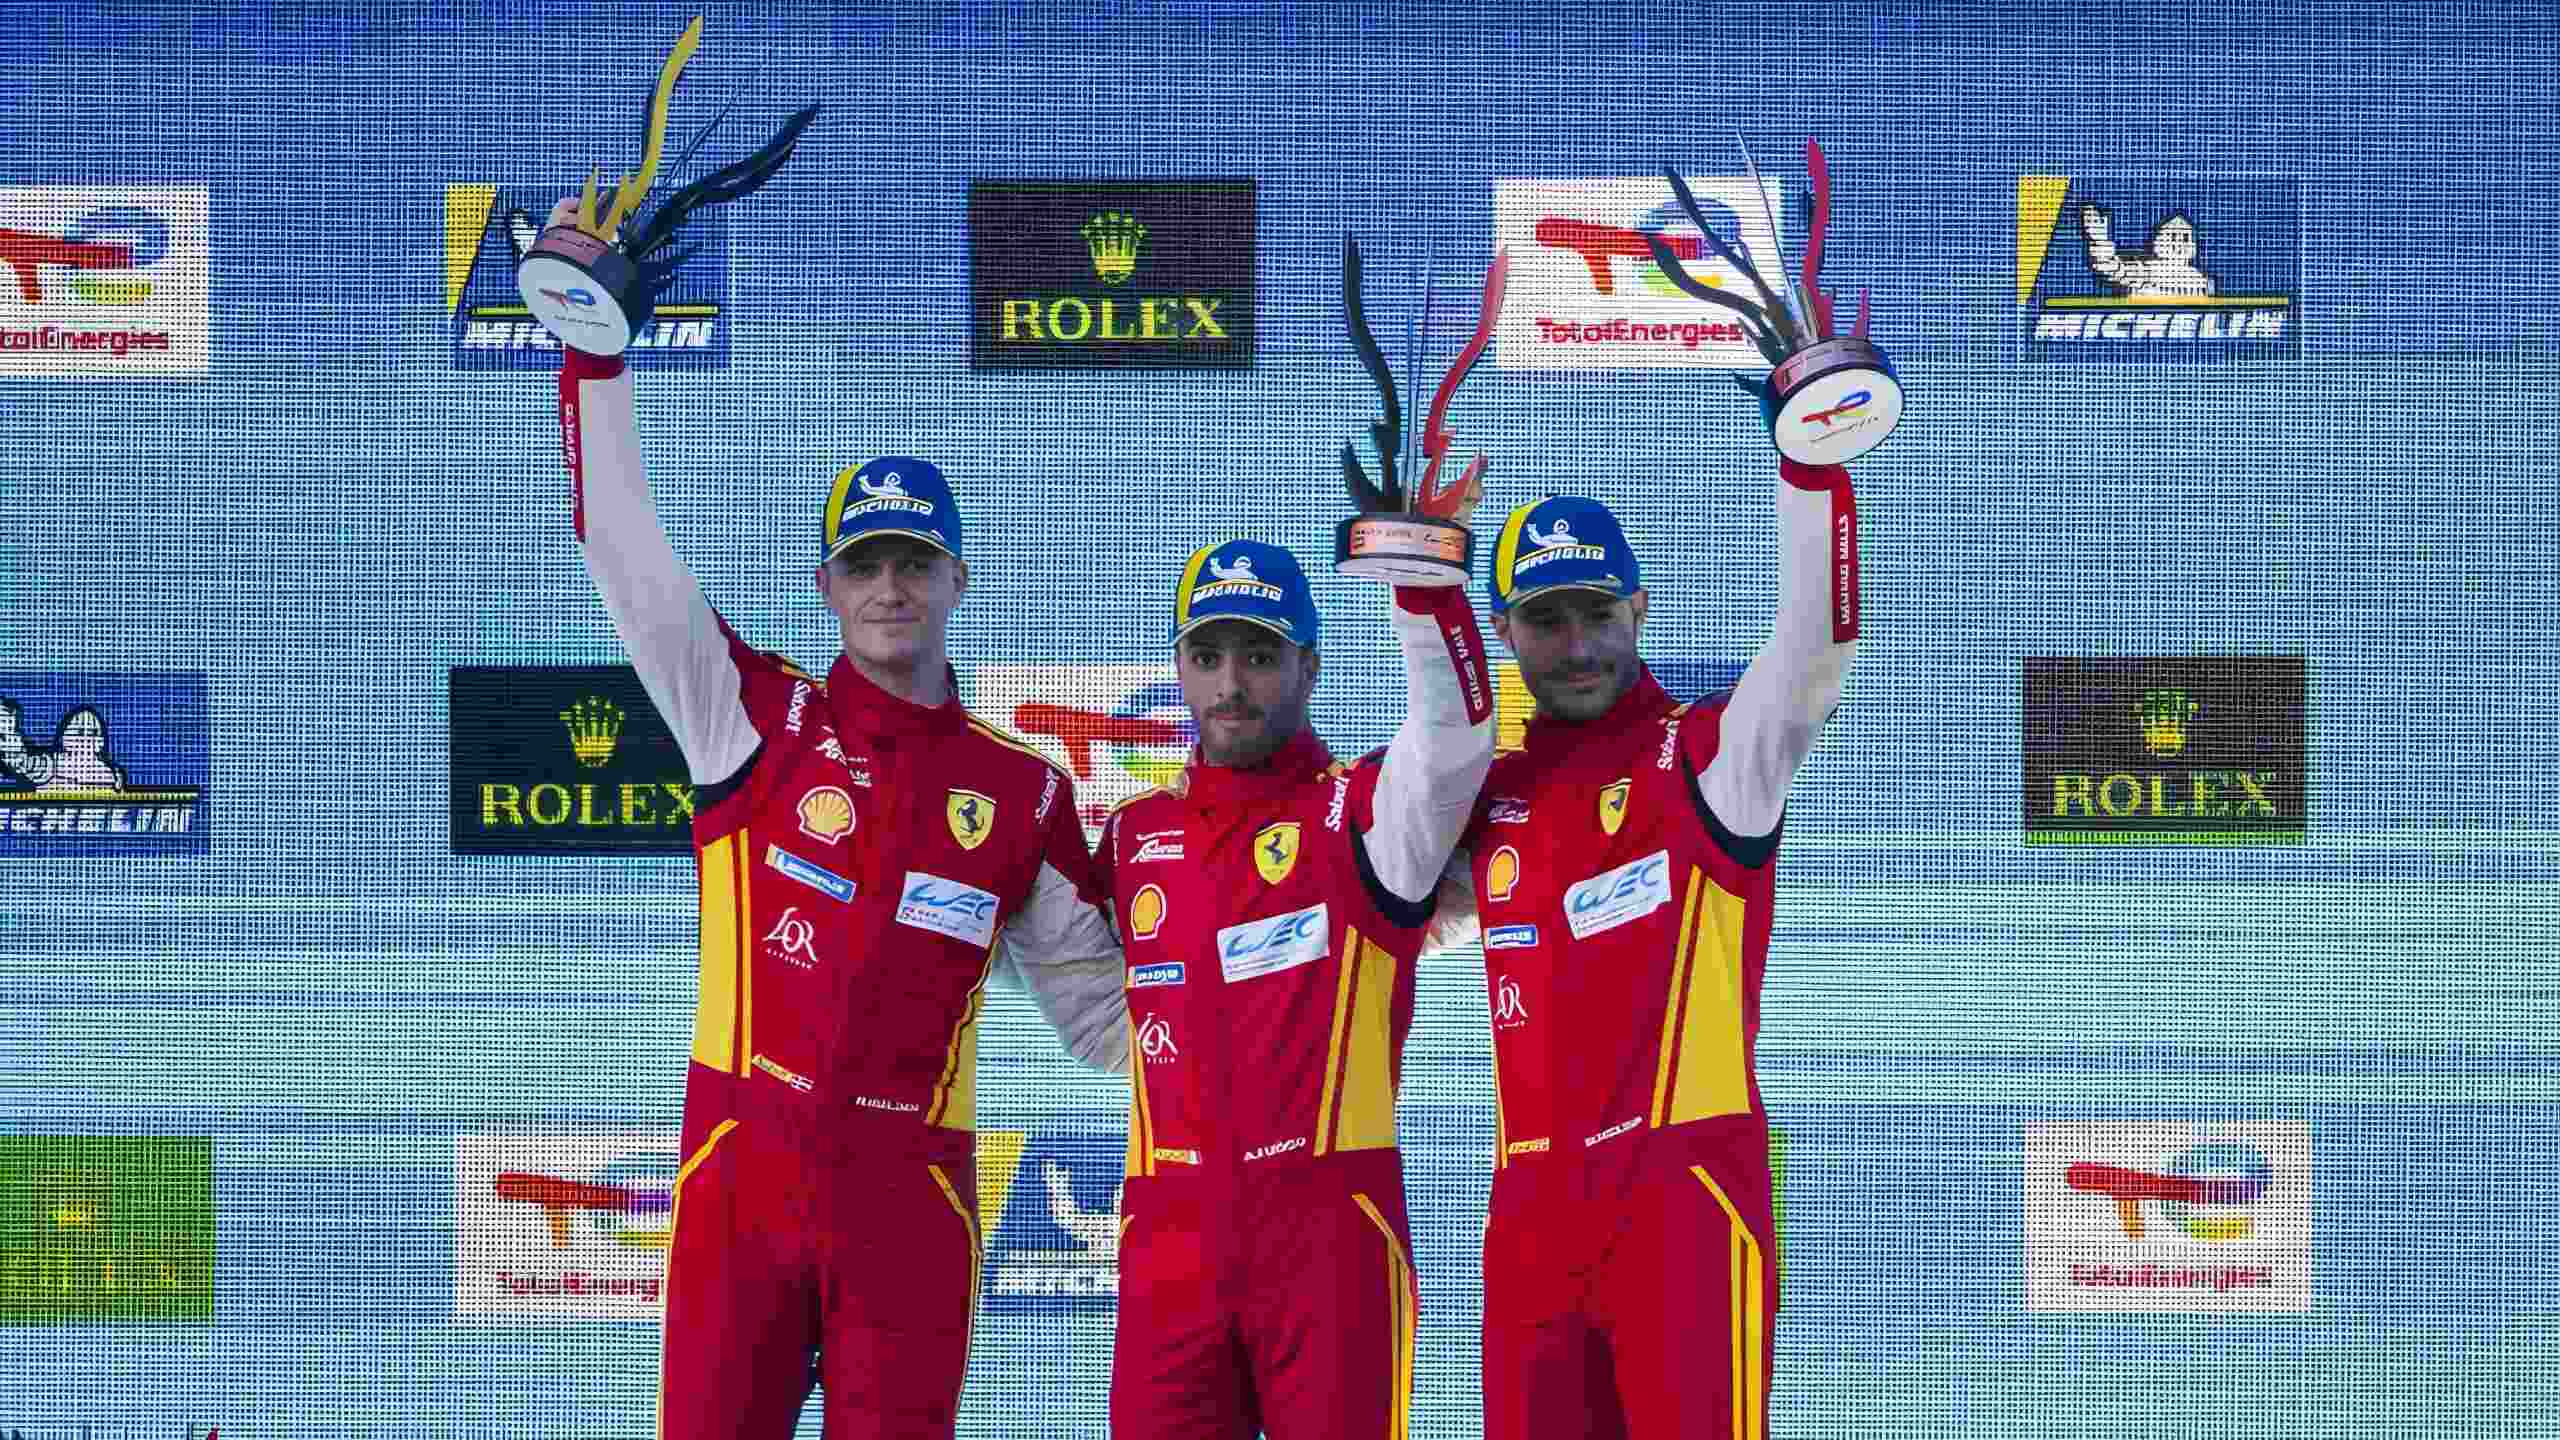 The Ferrari AF Corse Team After Securing Third (Fuoco-Molina-Nielsen) And Fourth (Pier Guidi-Calado-Giovinazzi) Places At The 6 Hours Of Spa